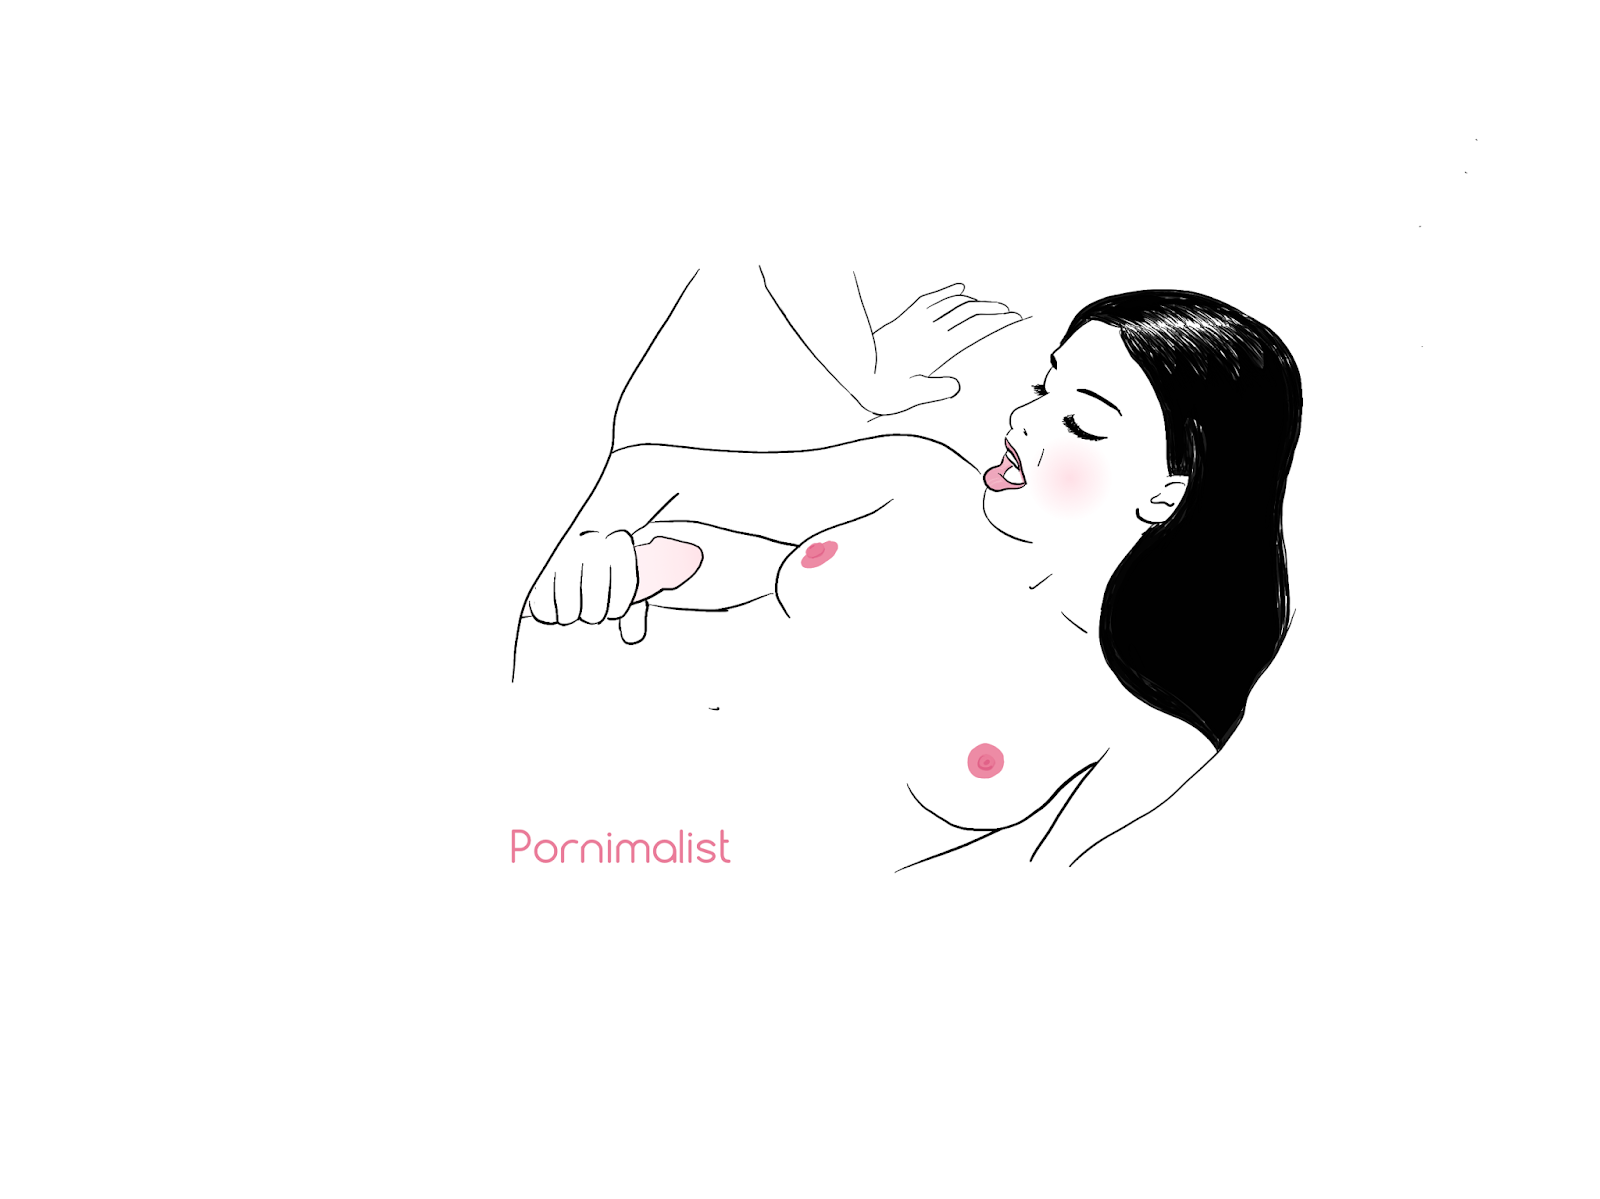 Photo by pornimalist with the username @pornimalist, who is a verified user,  October 27, 2020 at 6:15 AM. The post is about the topic Art Porn and the text says 'Pornimalist
Minimalist drawings Maximalist desires

#bellyshot #stroke #cum #couple #tits #cumunigintits #bodyshot'